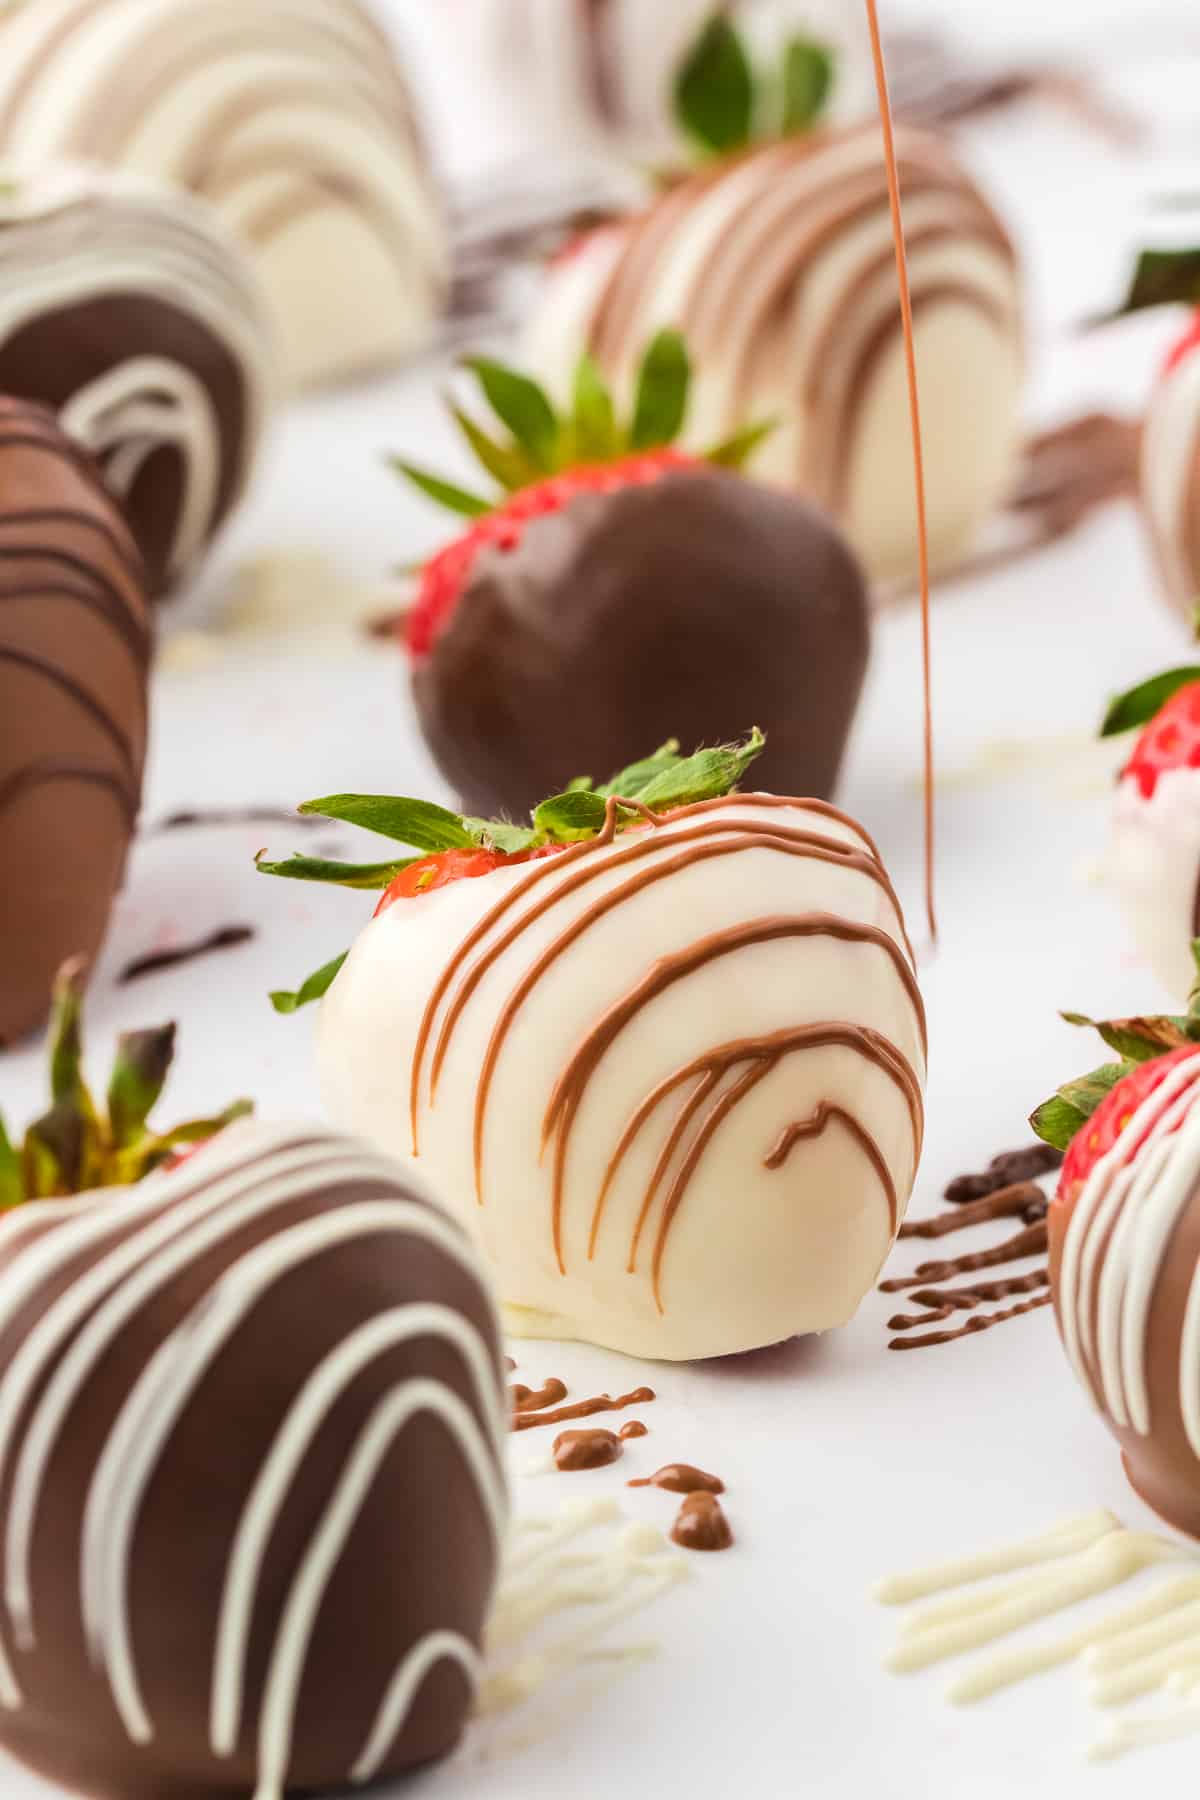 a white chocolate covered strawberry being drizzled with milk chocolate, surrounded by more chocolate covered strawberries